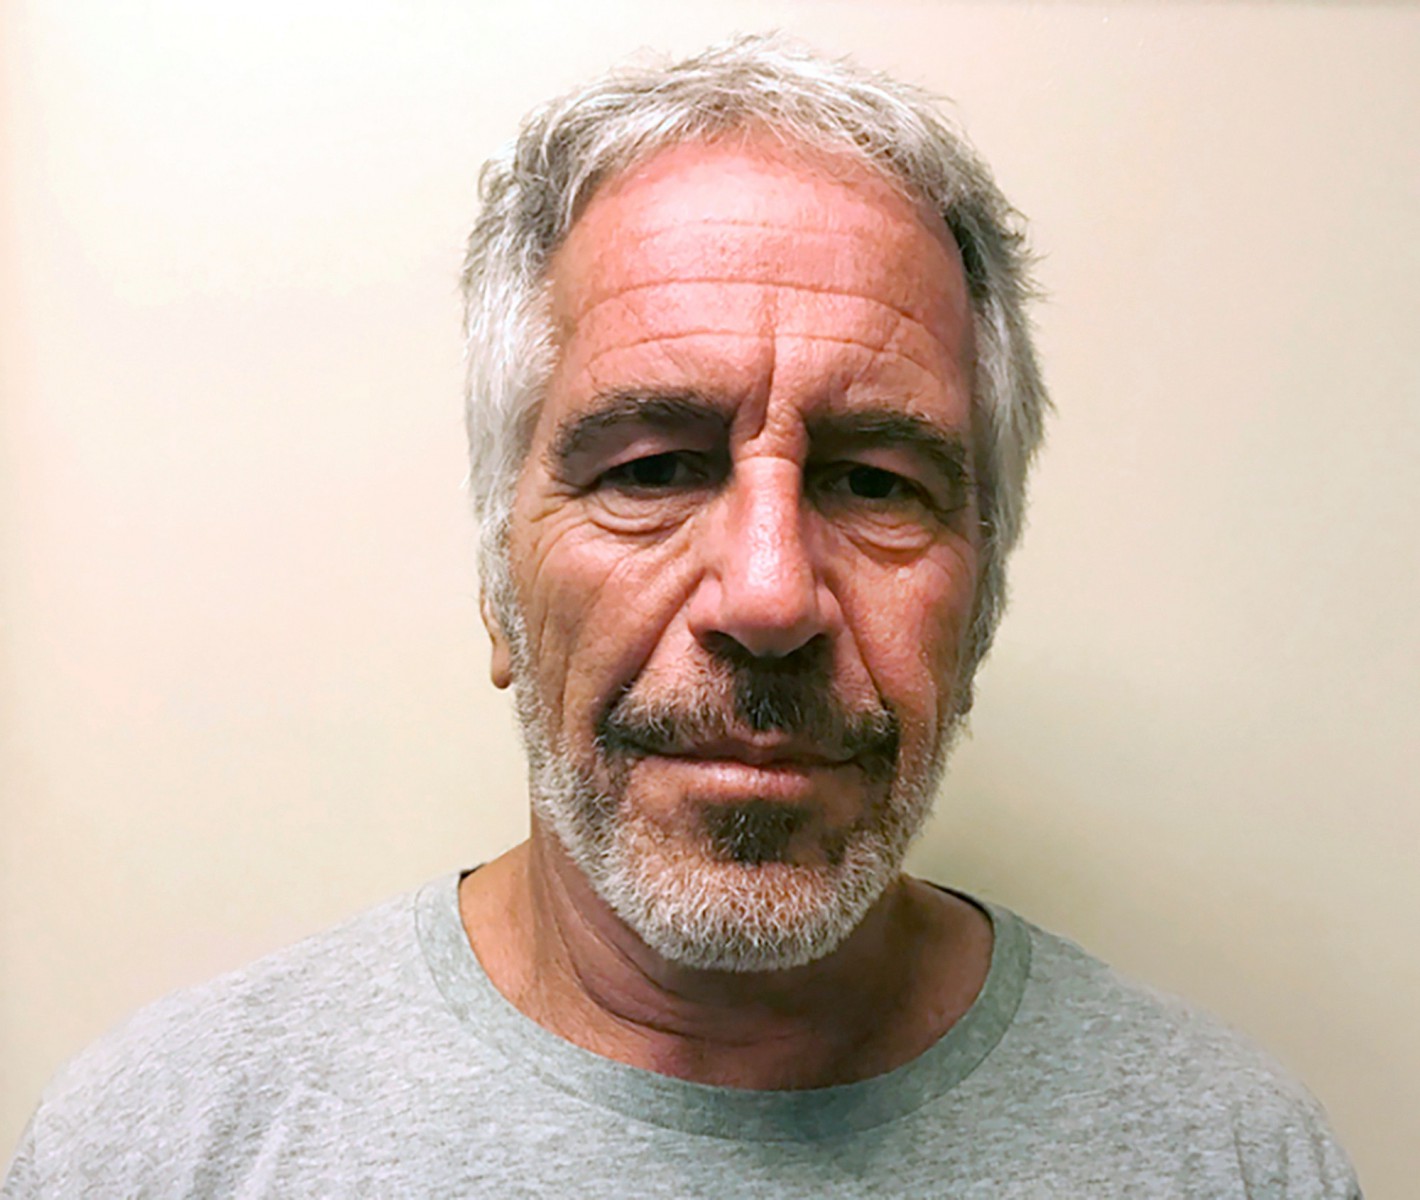  Epstein, who wasfound hanged in jail earlier this year, had been friends with Andrew since 1999